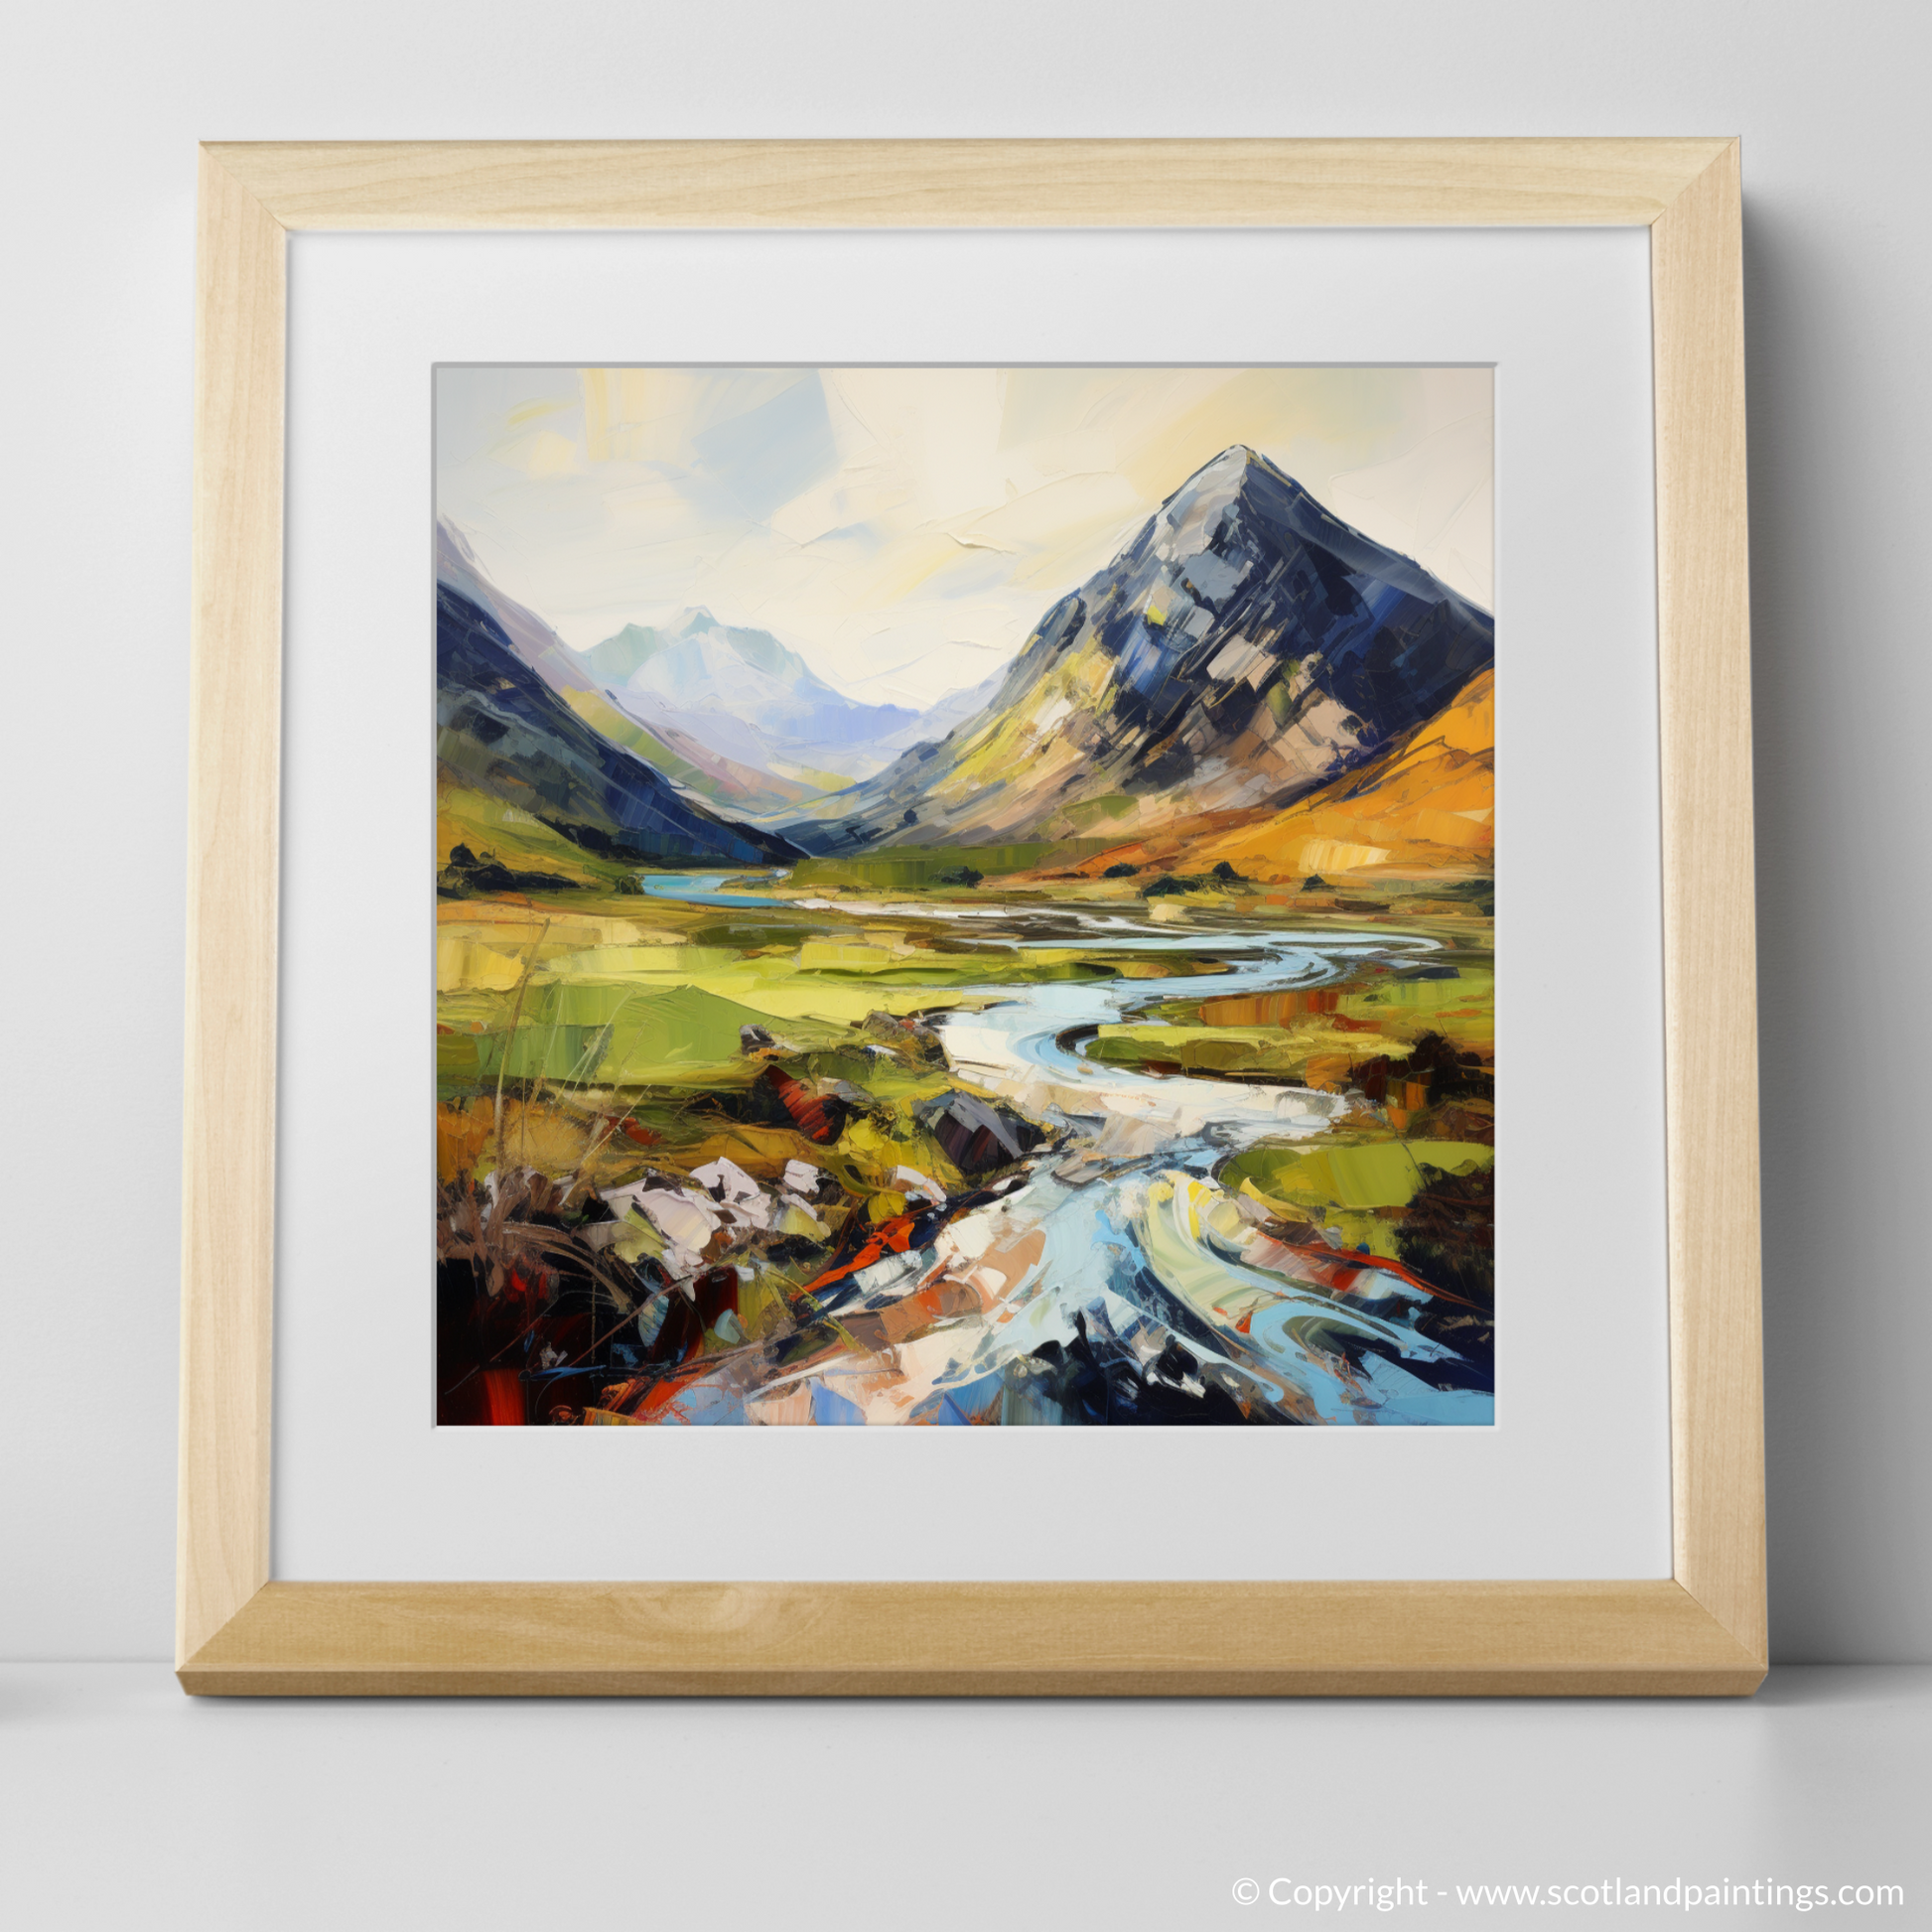 Art Print of Glencoe, Argyll and Bute with a natural frame